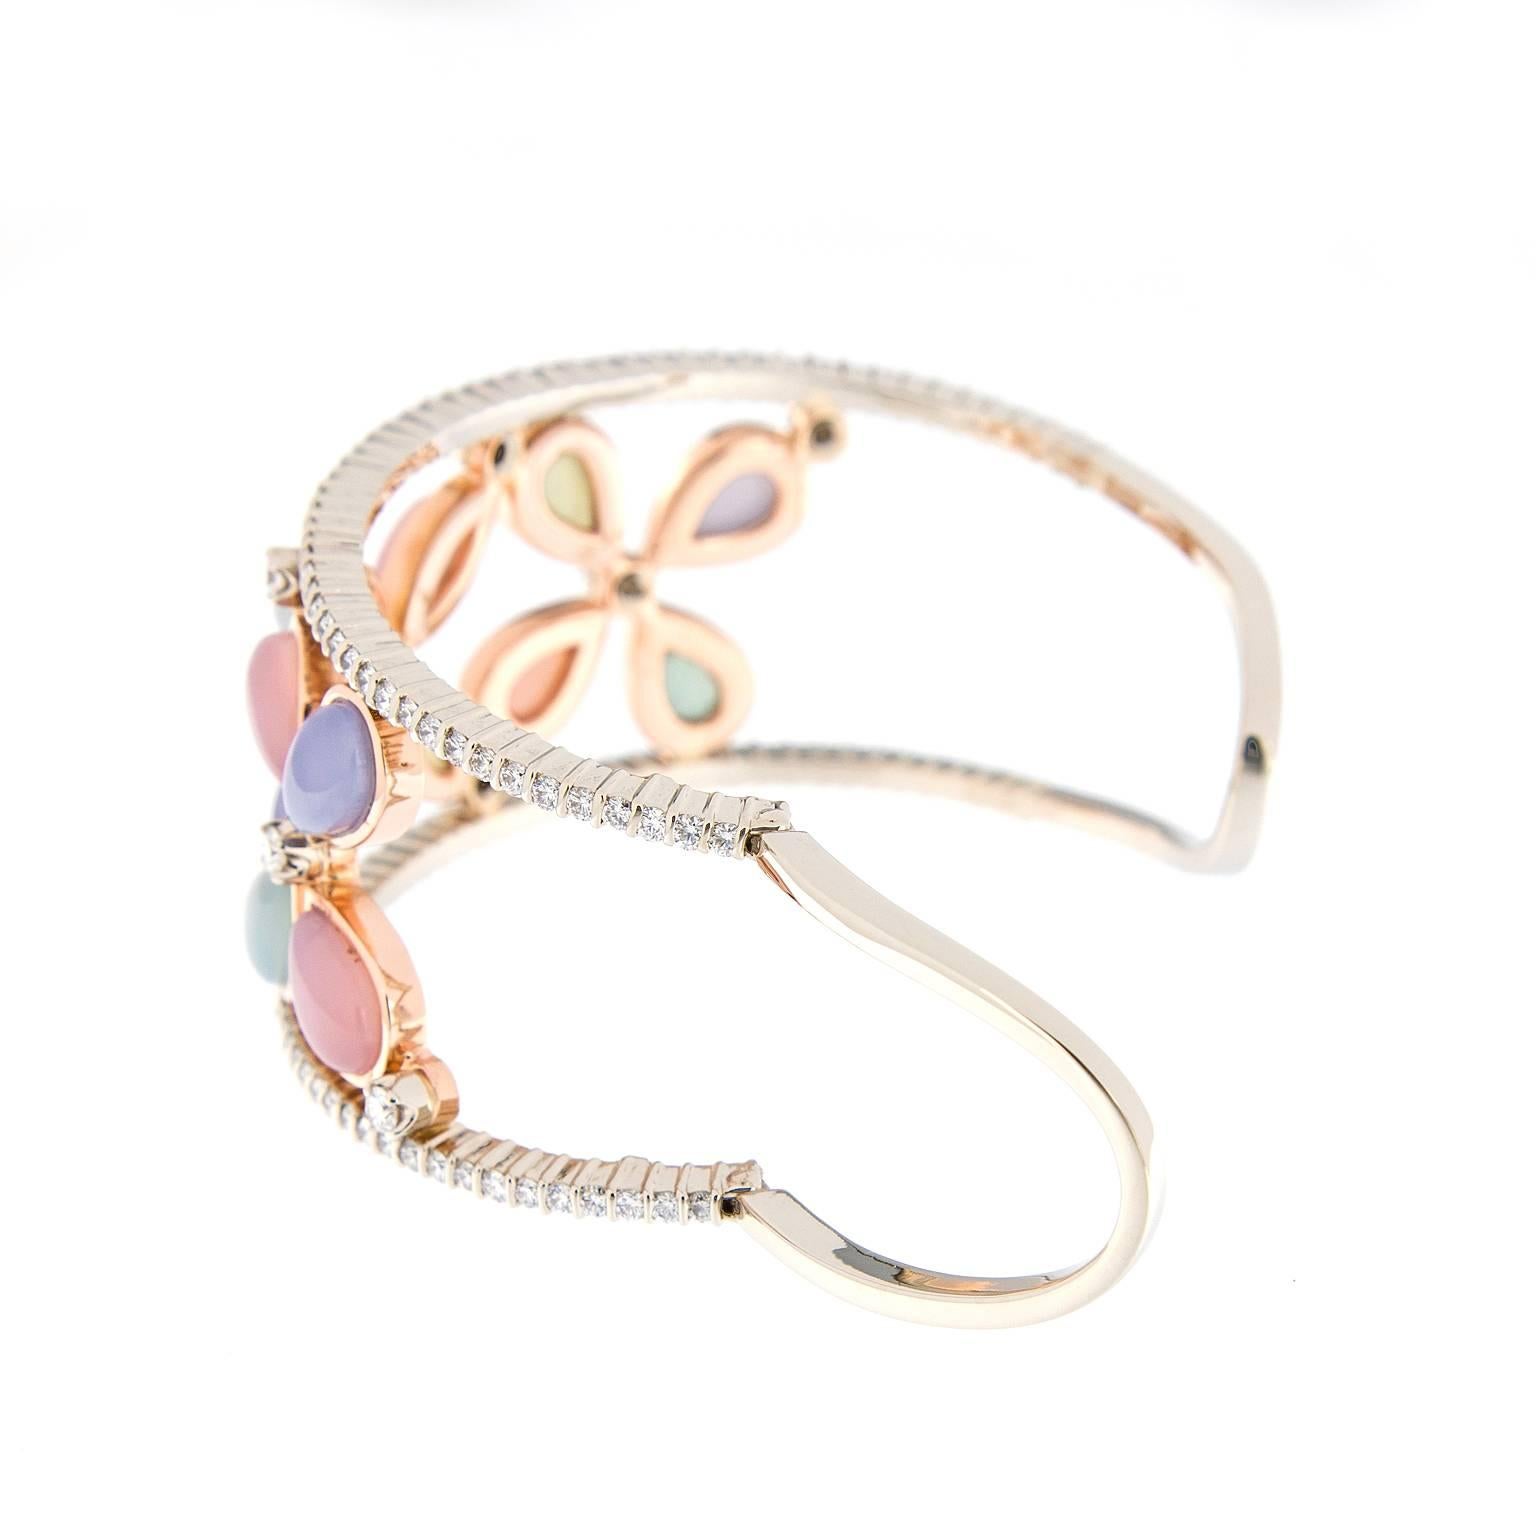 This 18k rose and white gold wide cuff bracelet features three open work floral designs with blue, pink and green chalcedony accented with over three carats of diamonds. Weighs 48.8 grams.
Handmade in New York

Diamond 3.30 cttw